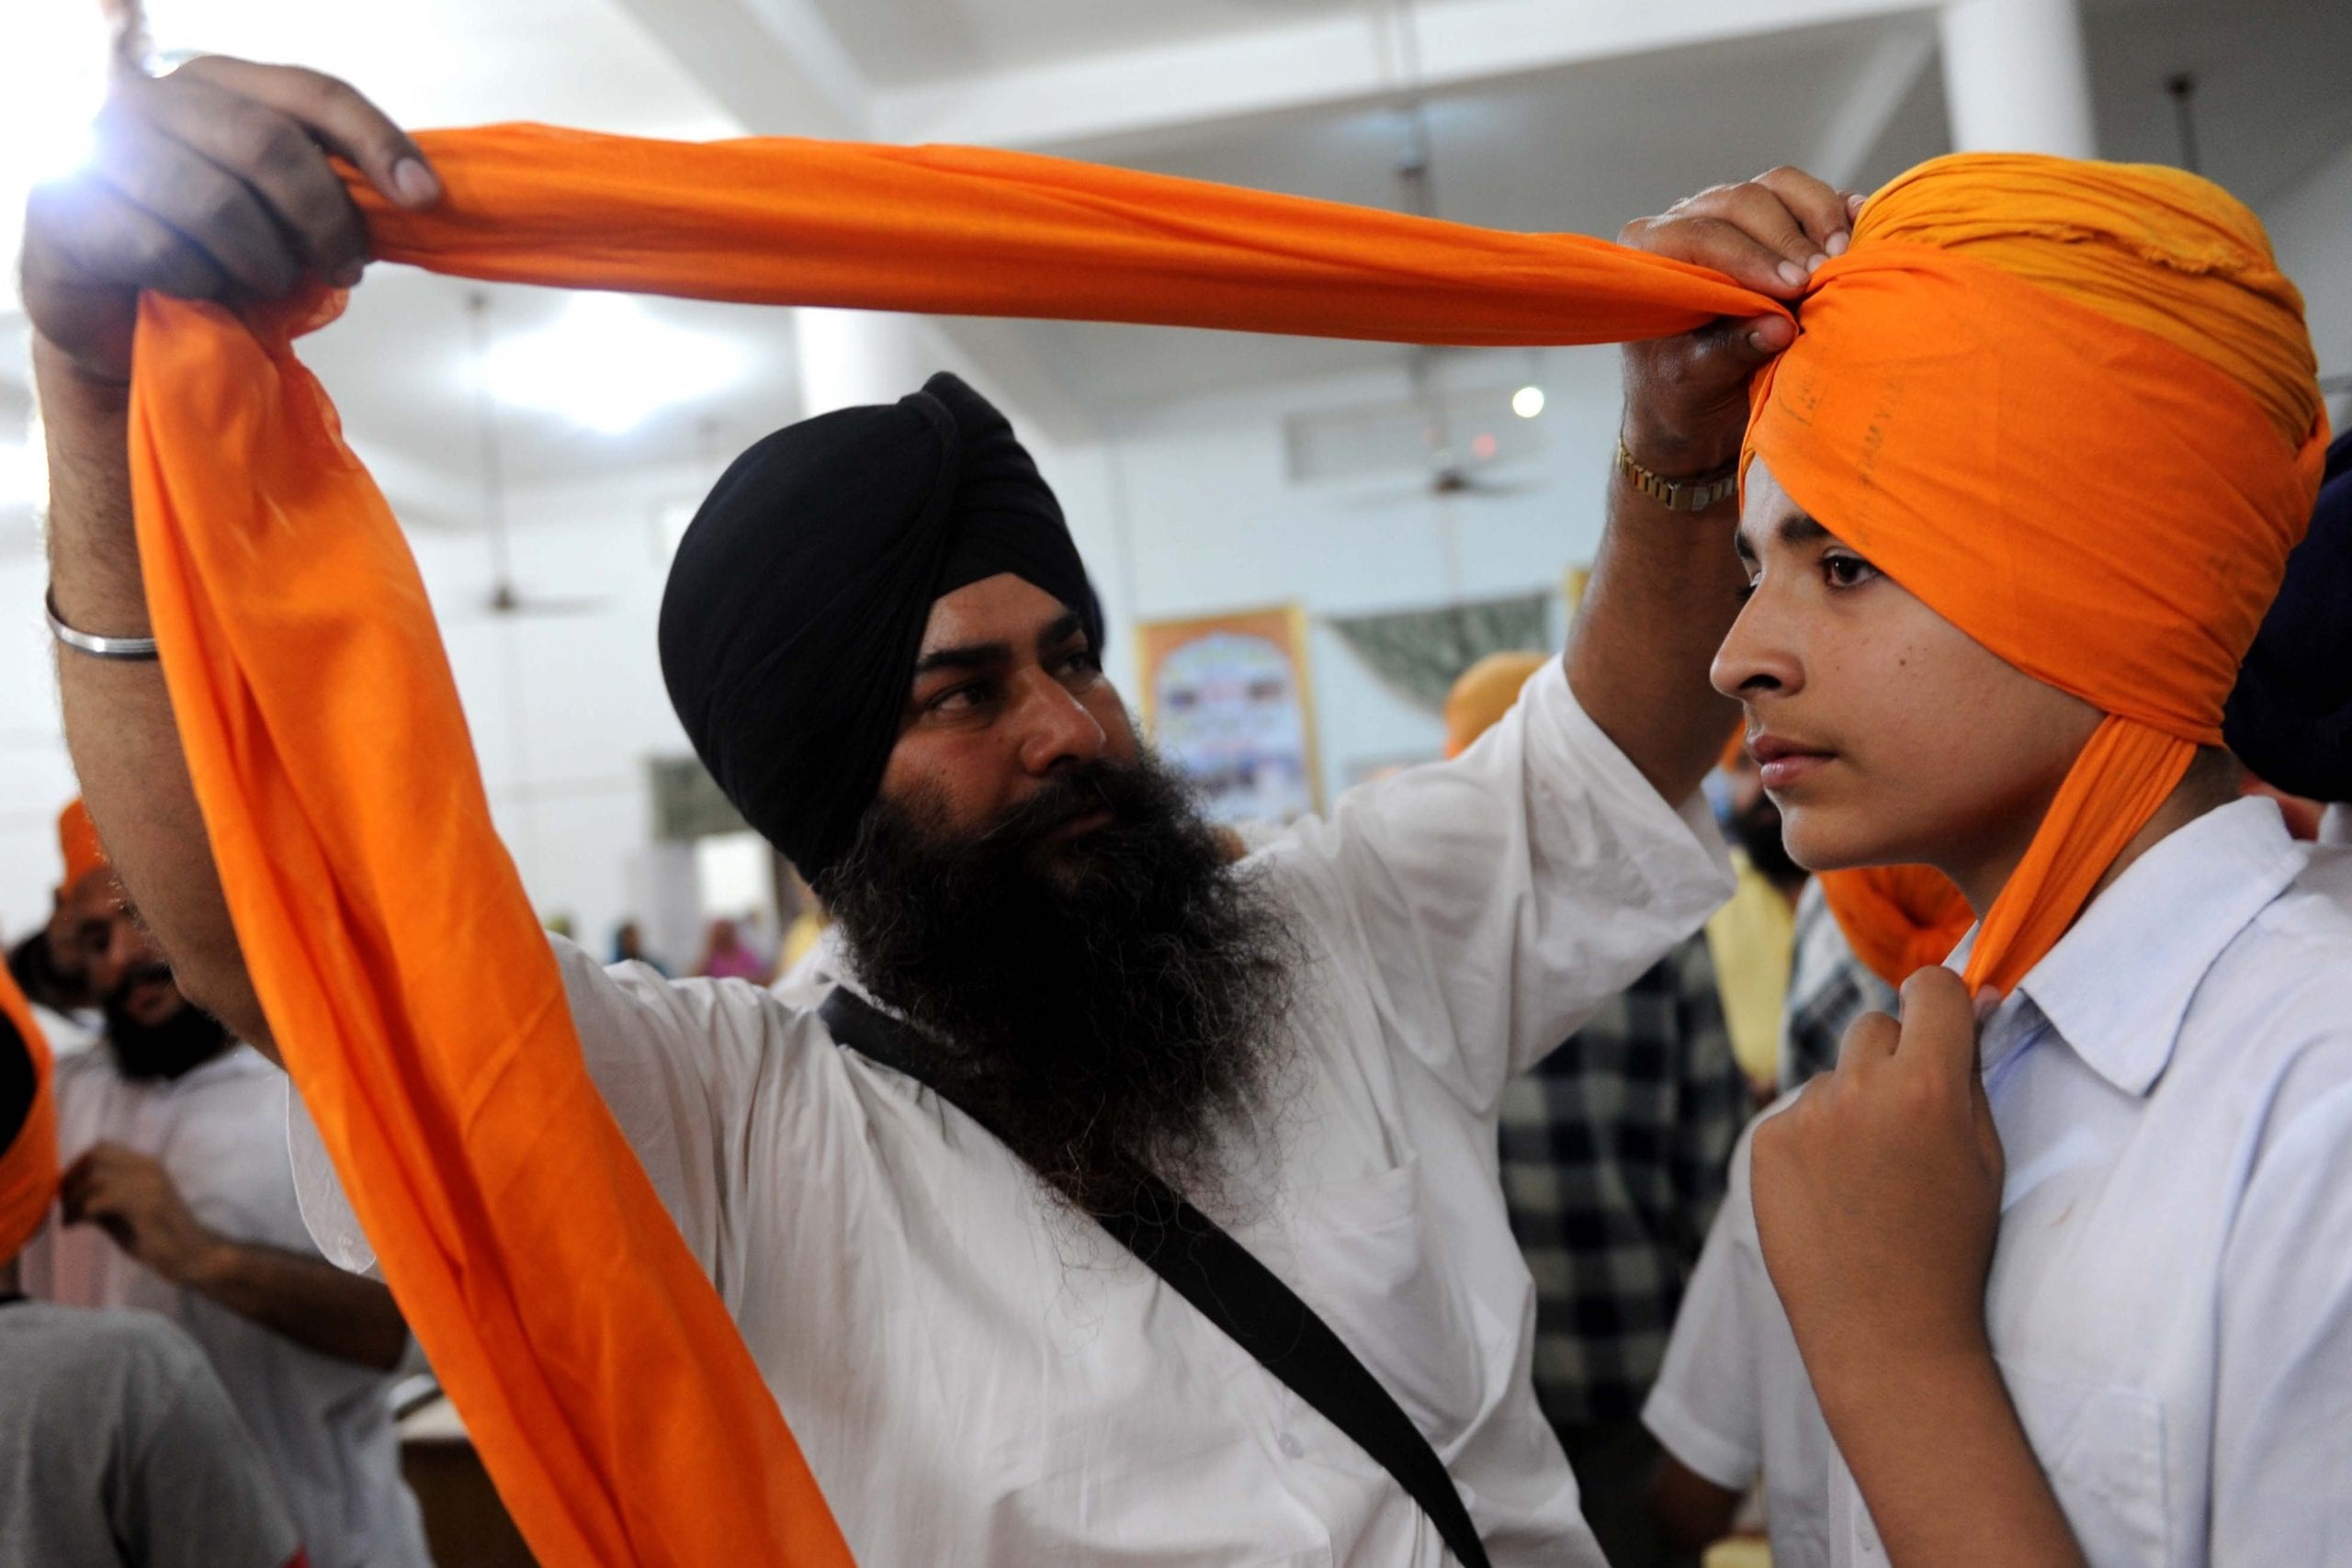 What is the significance of the turban